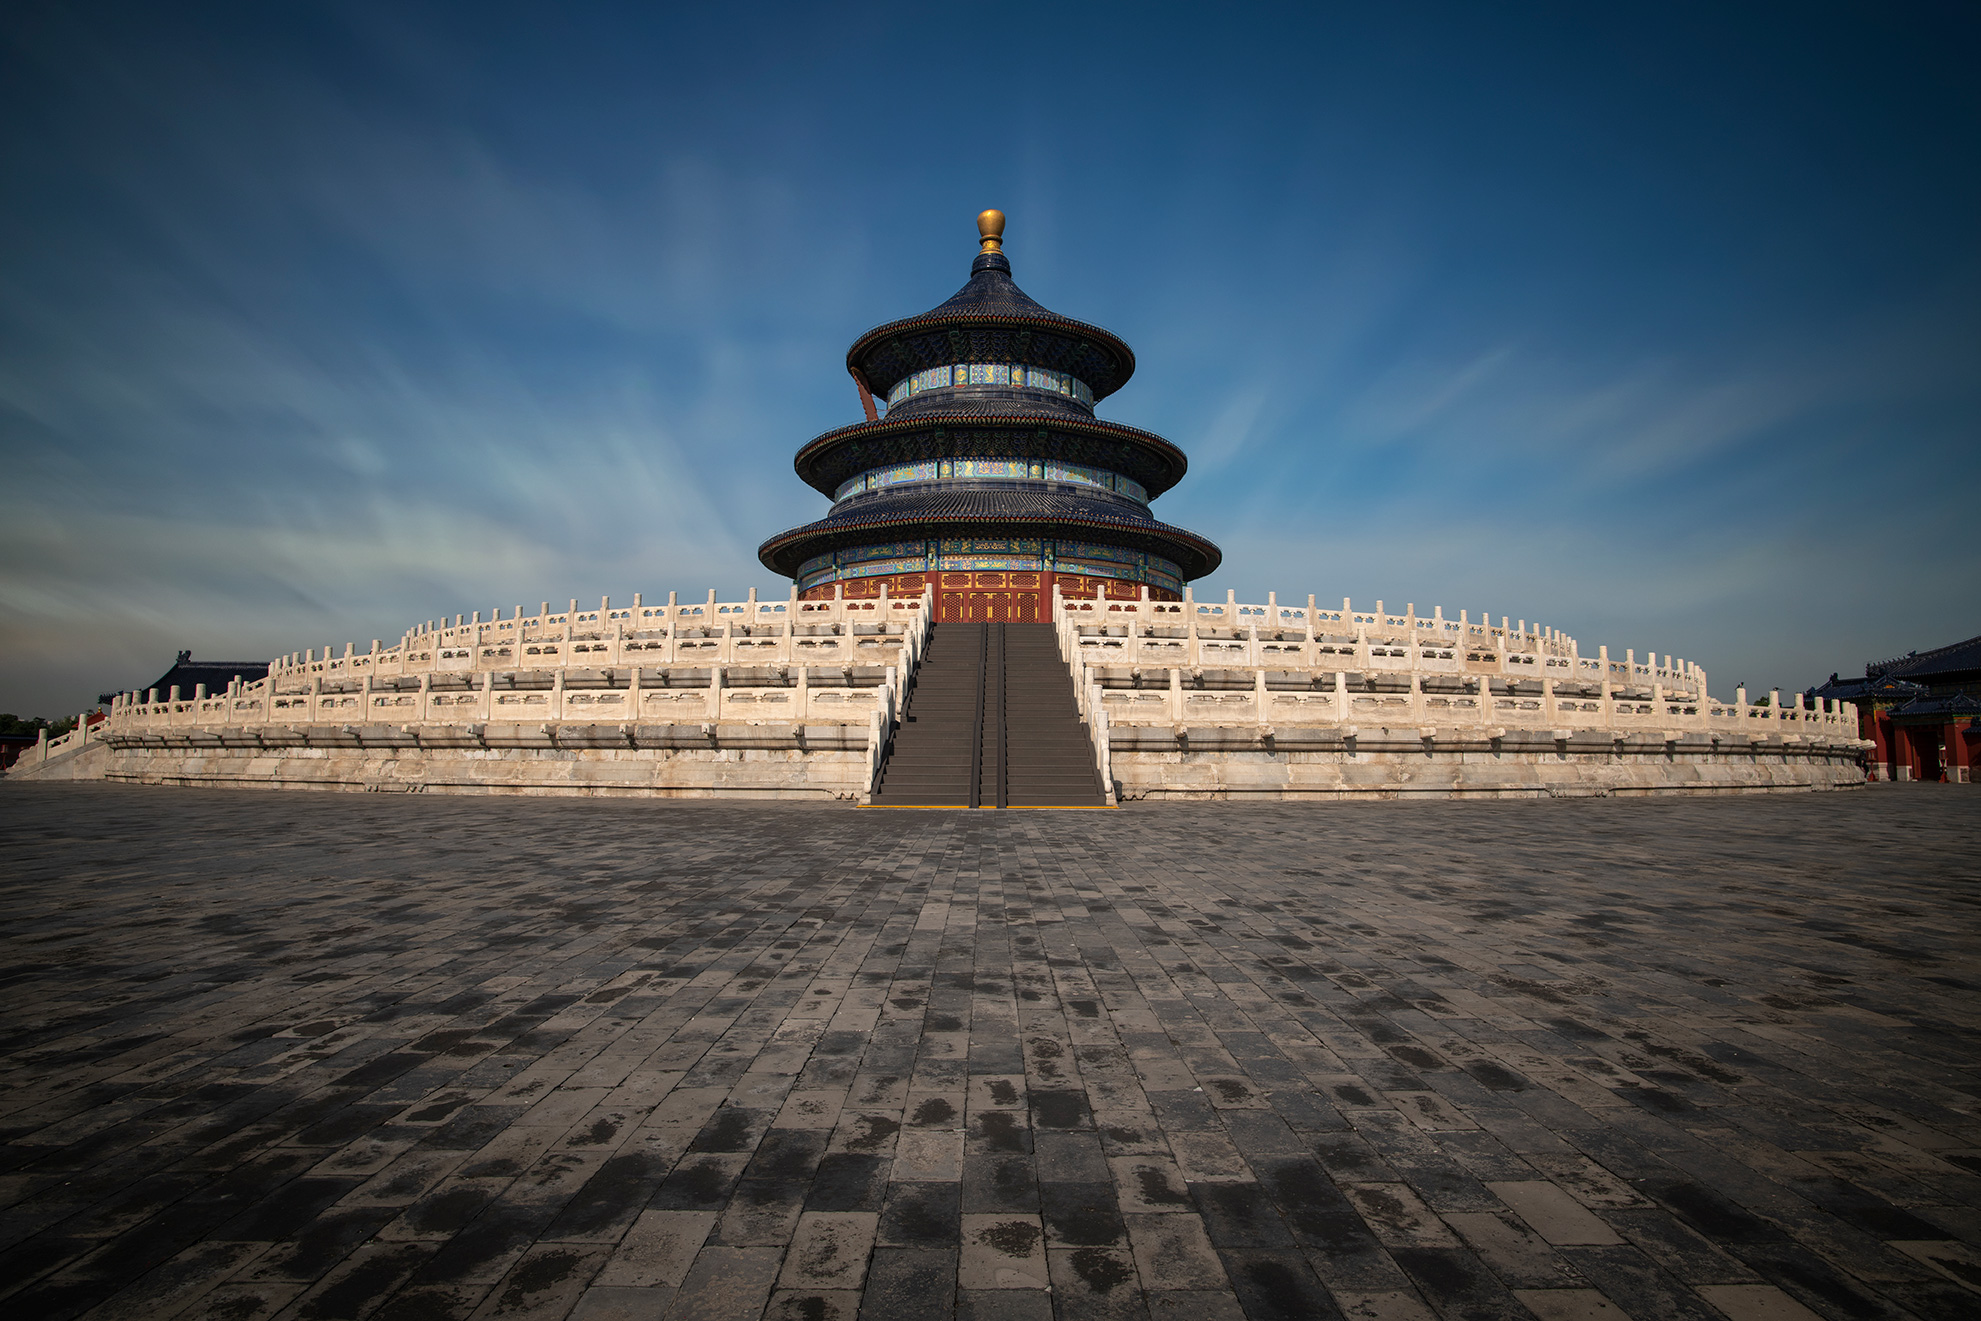 An early morning quiet in the courtard before the Hall of Prayer within the Temple of Heaven, Beijing